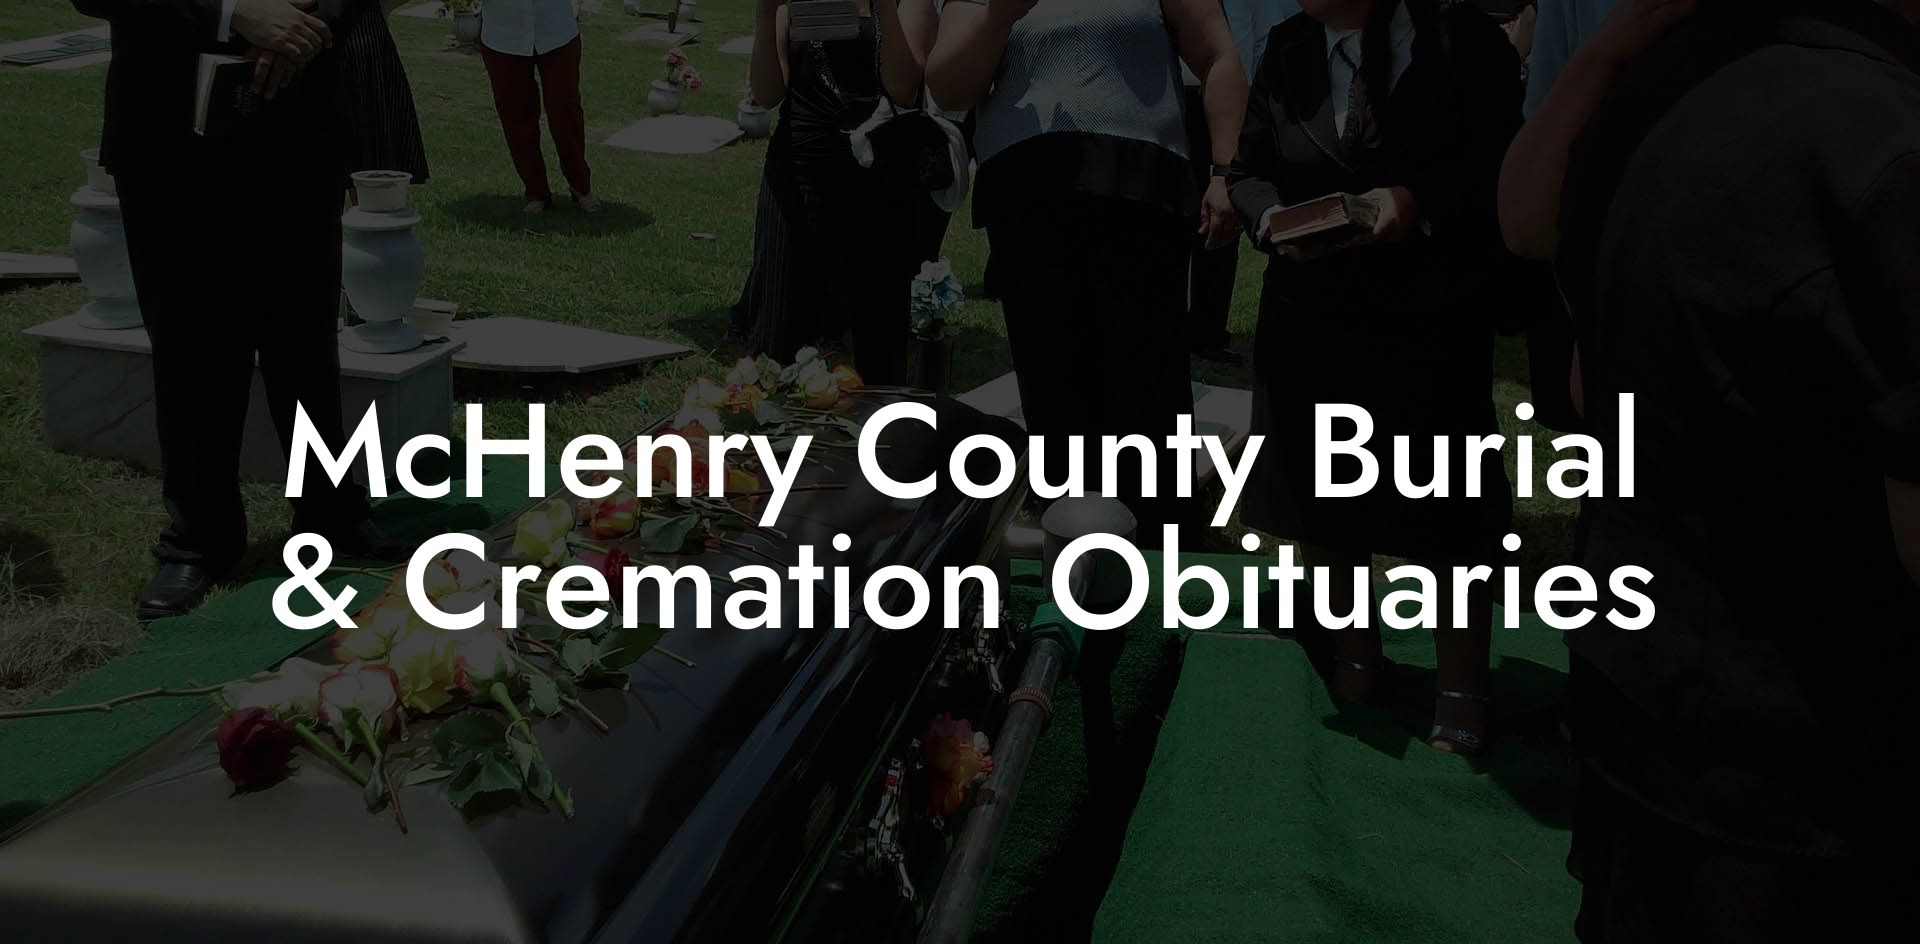 McHenry County Burial & Cremation Obituaries